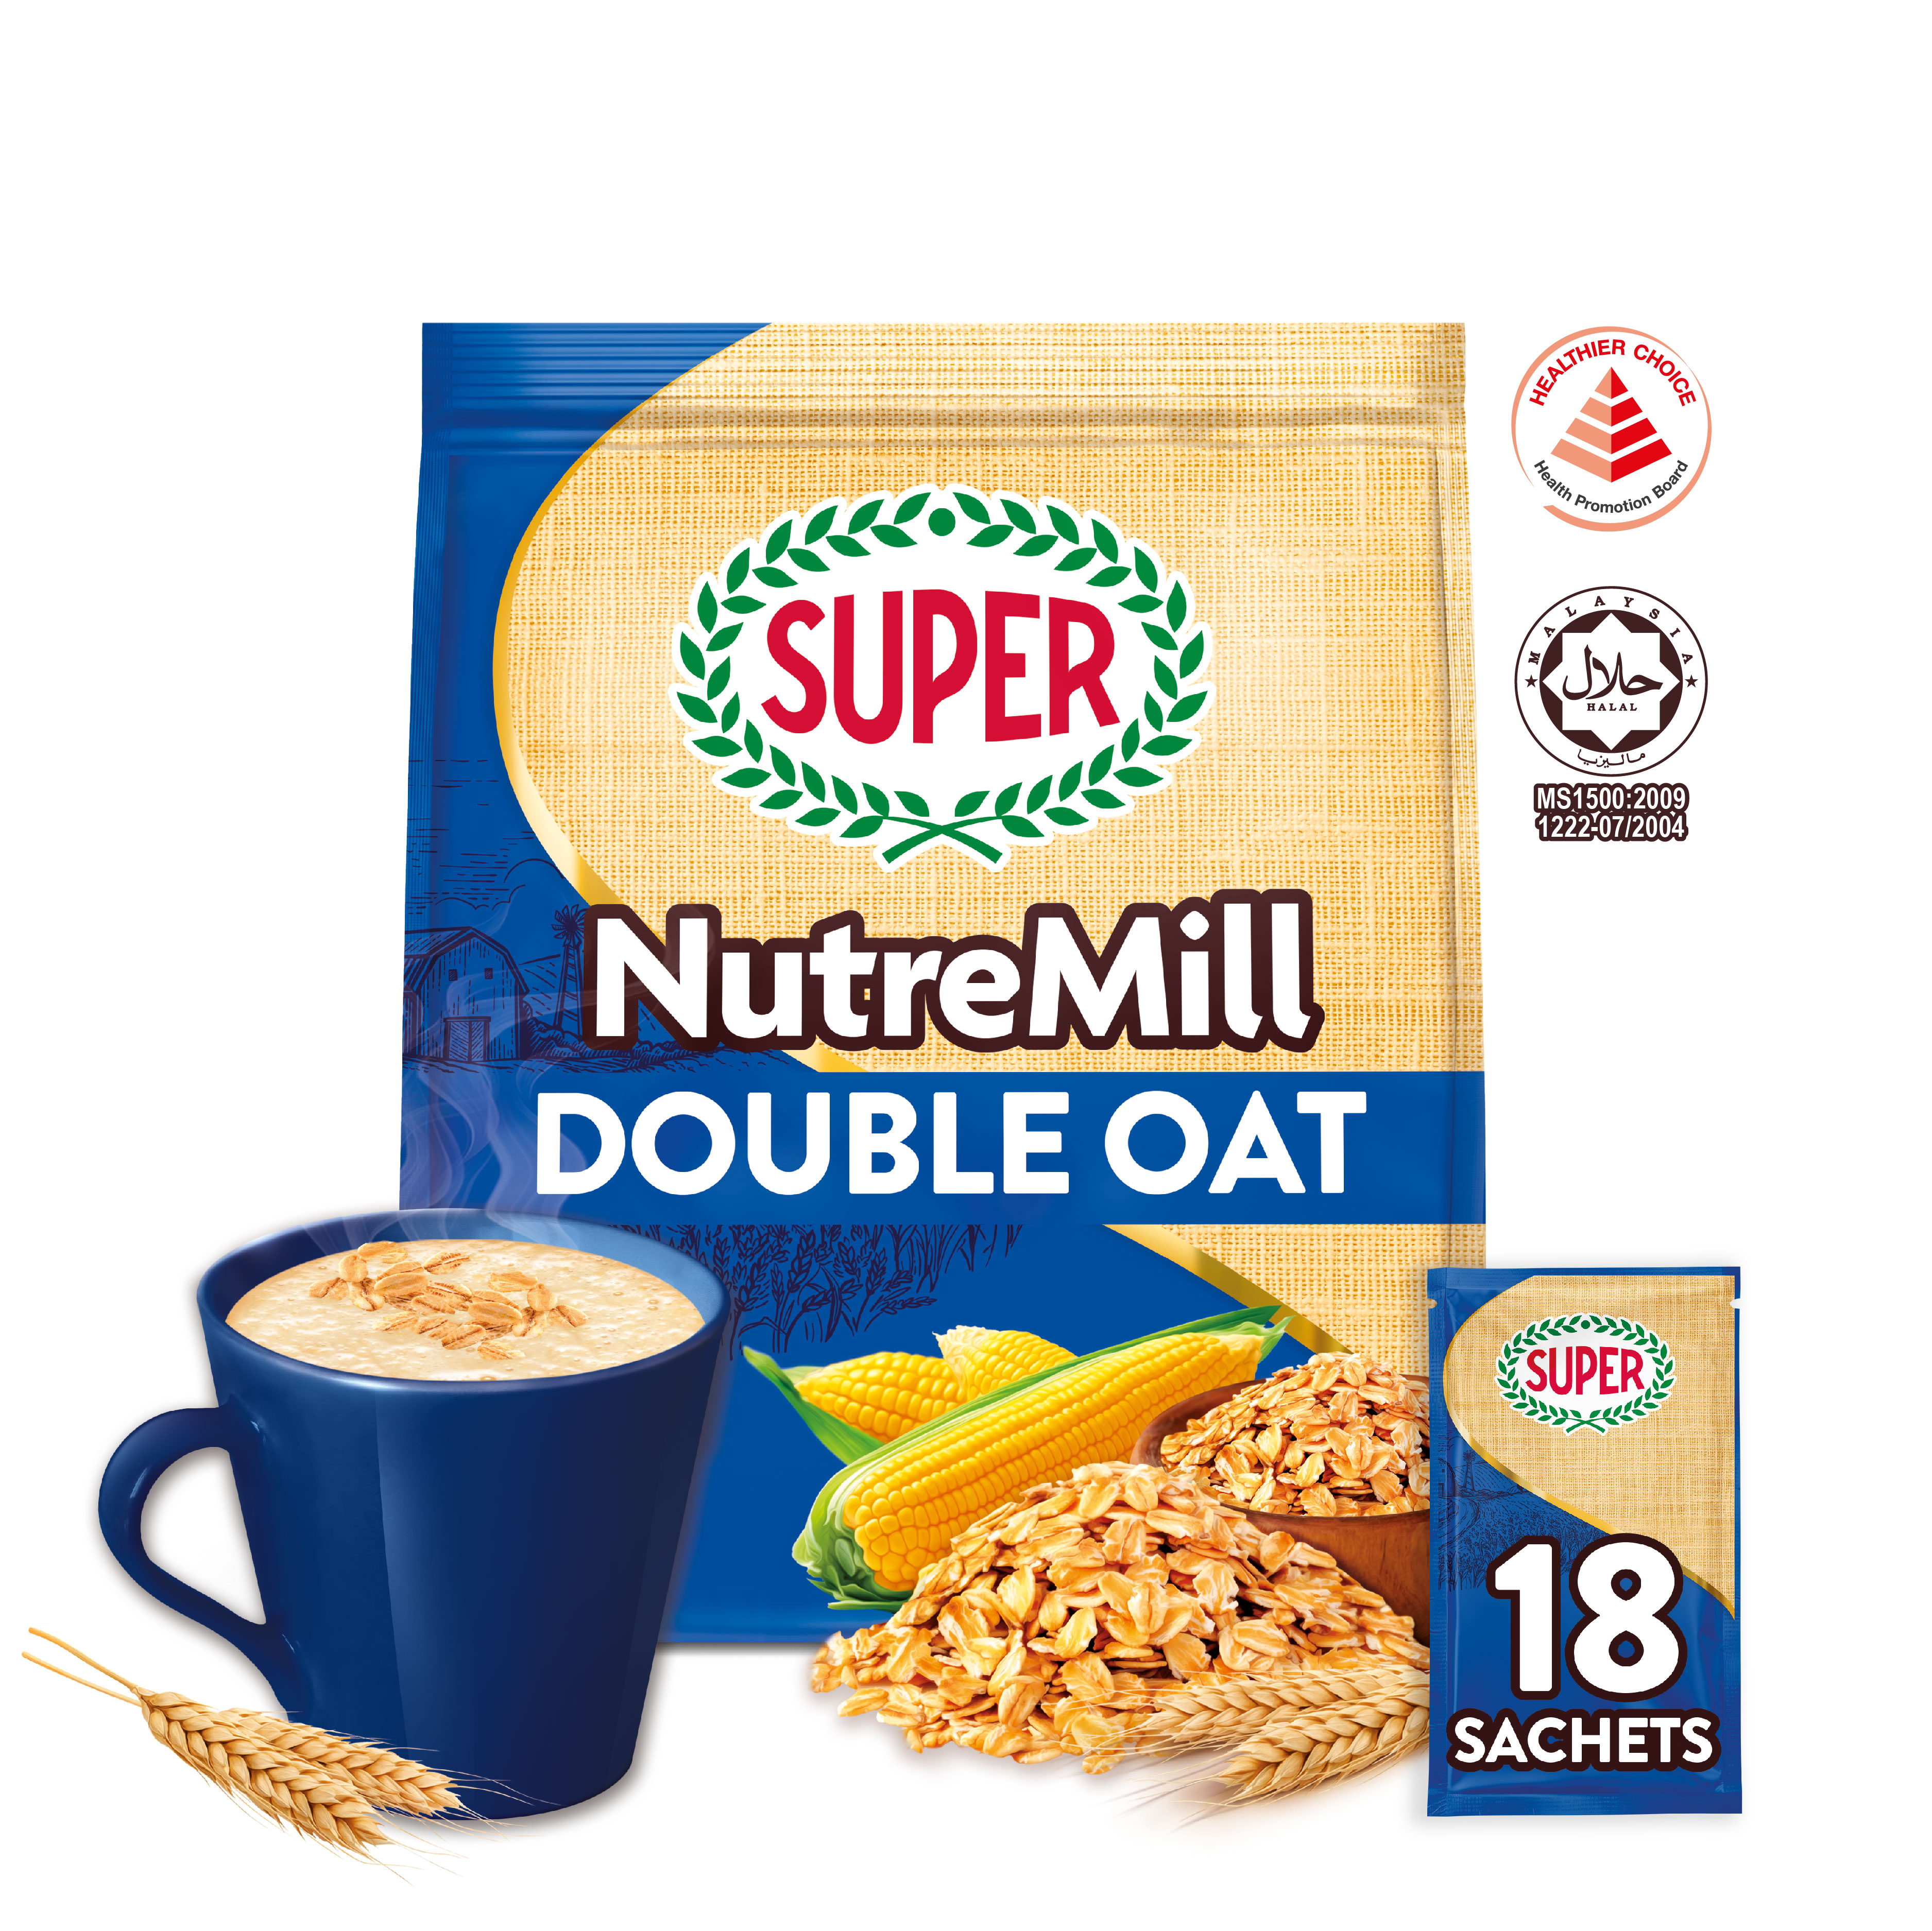 SUPER NutreMill Double Oat, 3in1 Cereal, 18 sachets